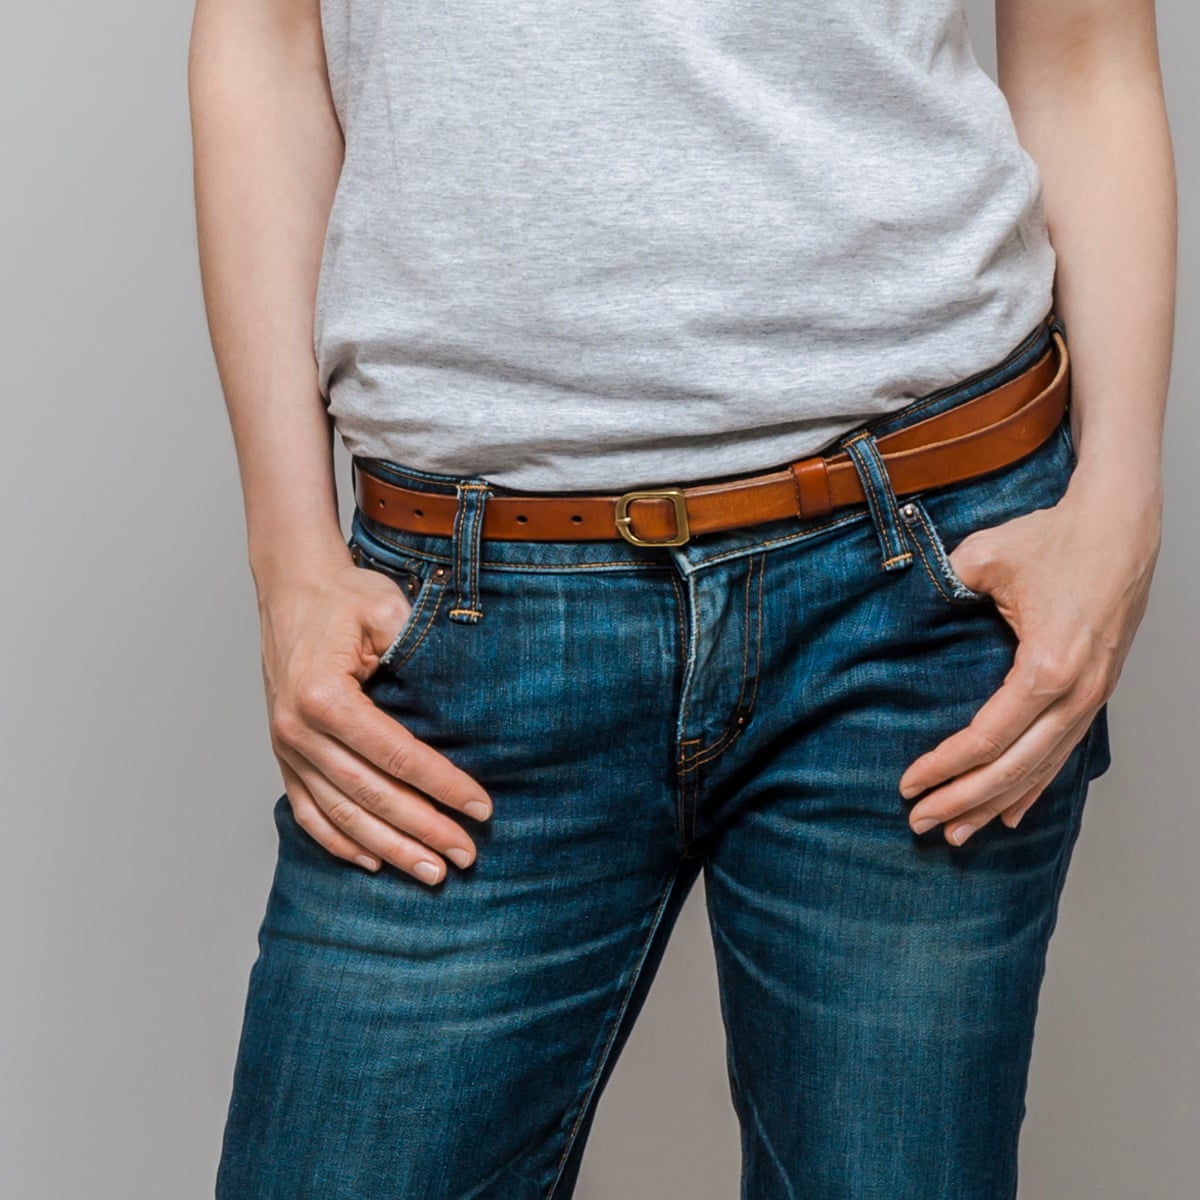 When it comes to women's pockets, size really does matter, Chelsea G  Summers